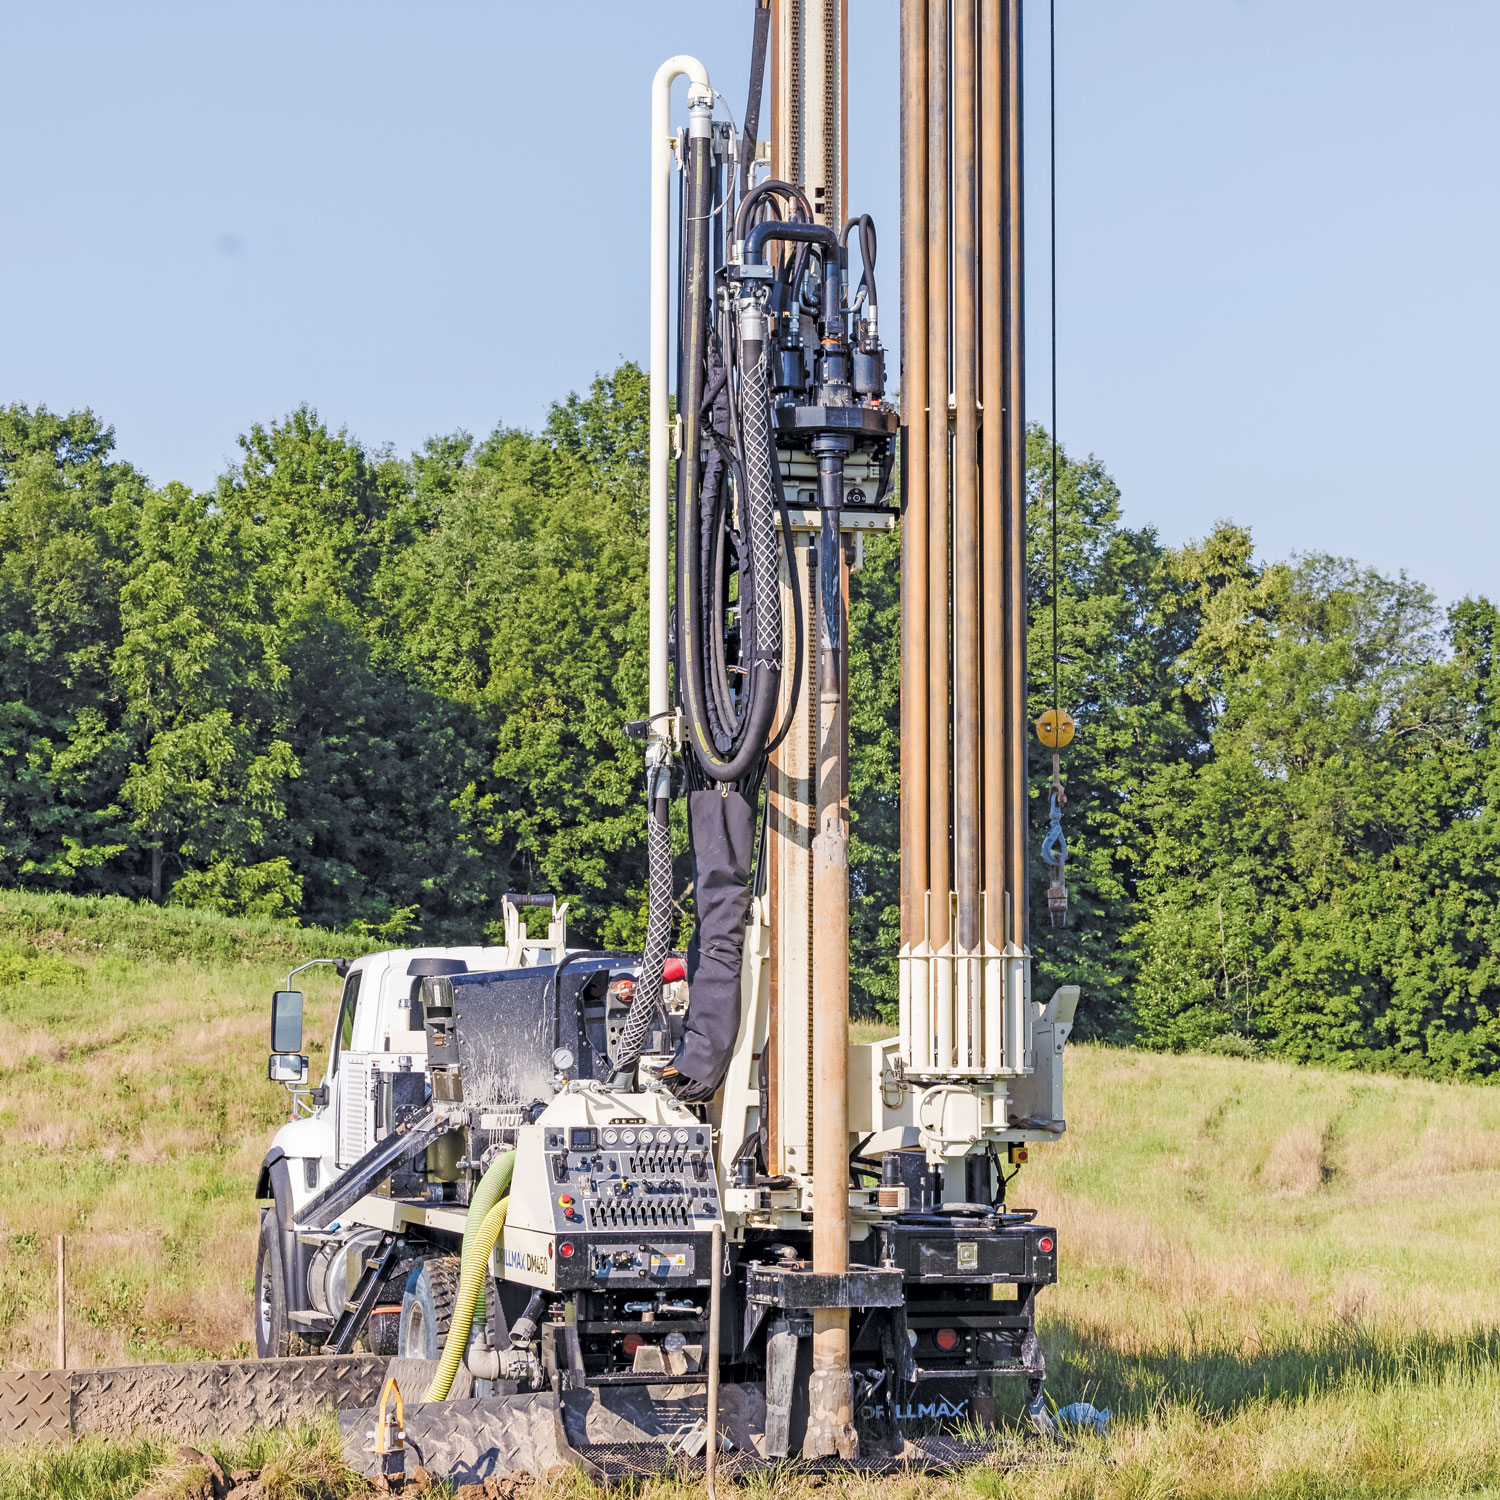 Hydraulic over electronic controls and five gauges on control panel make the DM450 well drilling rig easy to use and simple to diagnose troubles in the field. Sturdy drillmast with roller system reduces strain on rig so DM450 performs same water well drilling to 600 feet as it does to 20 feet.